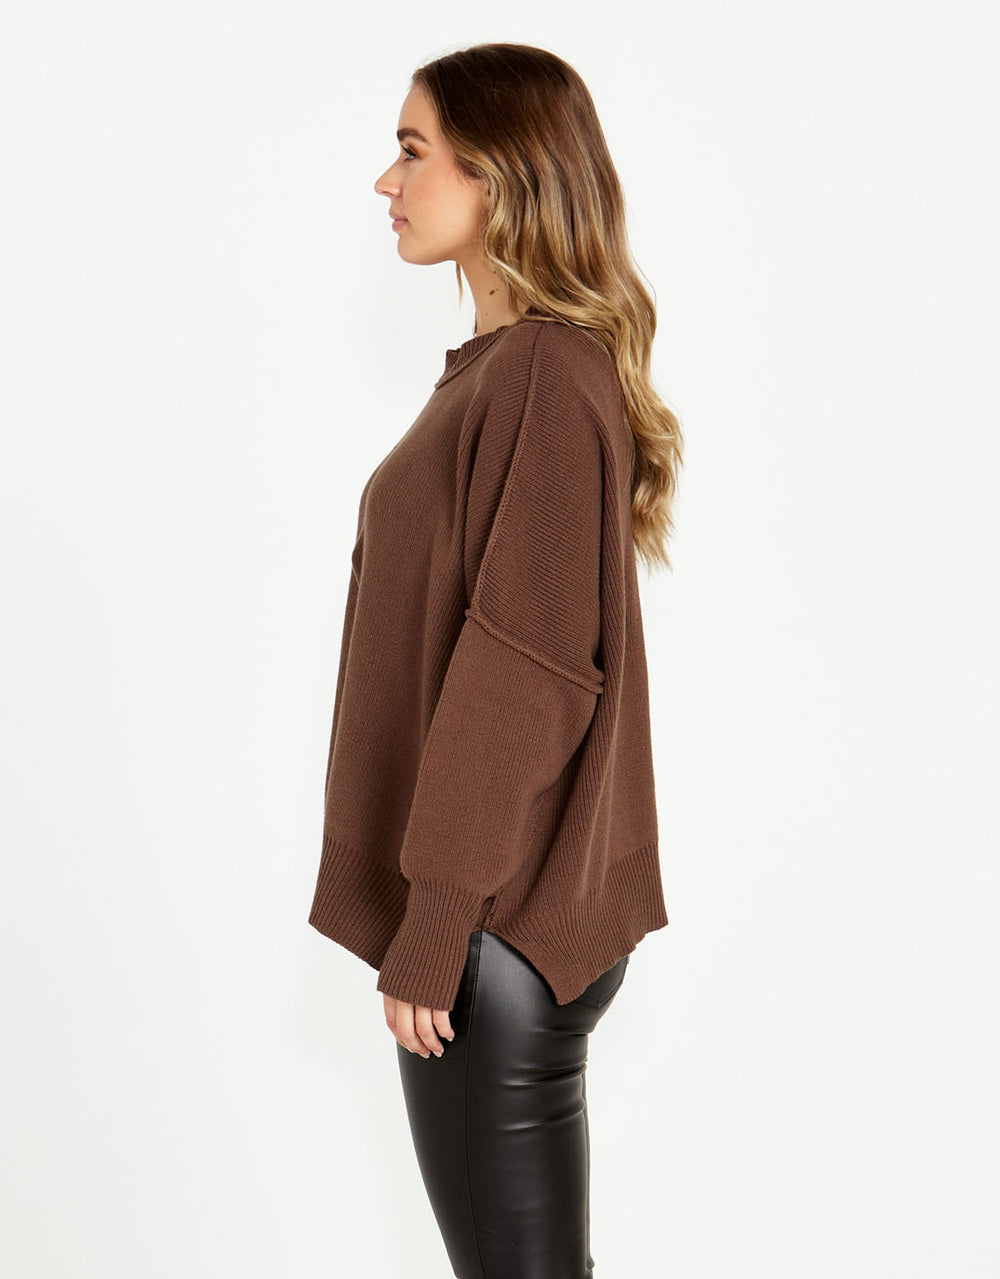 sass-clothing-leora-knit-jumper-chocolate-womens-clothing